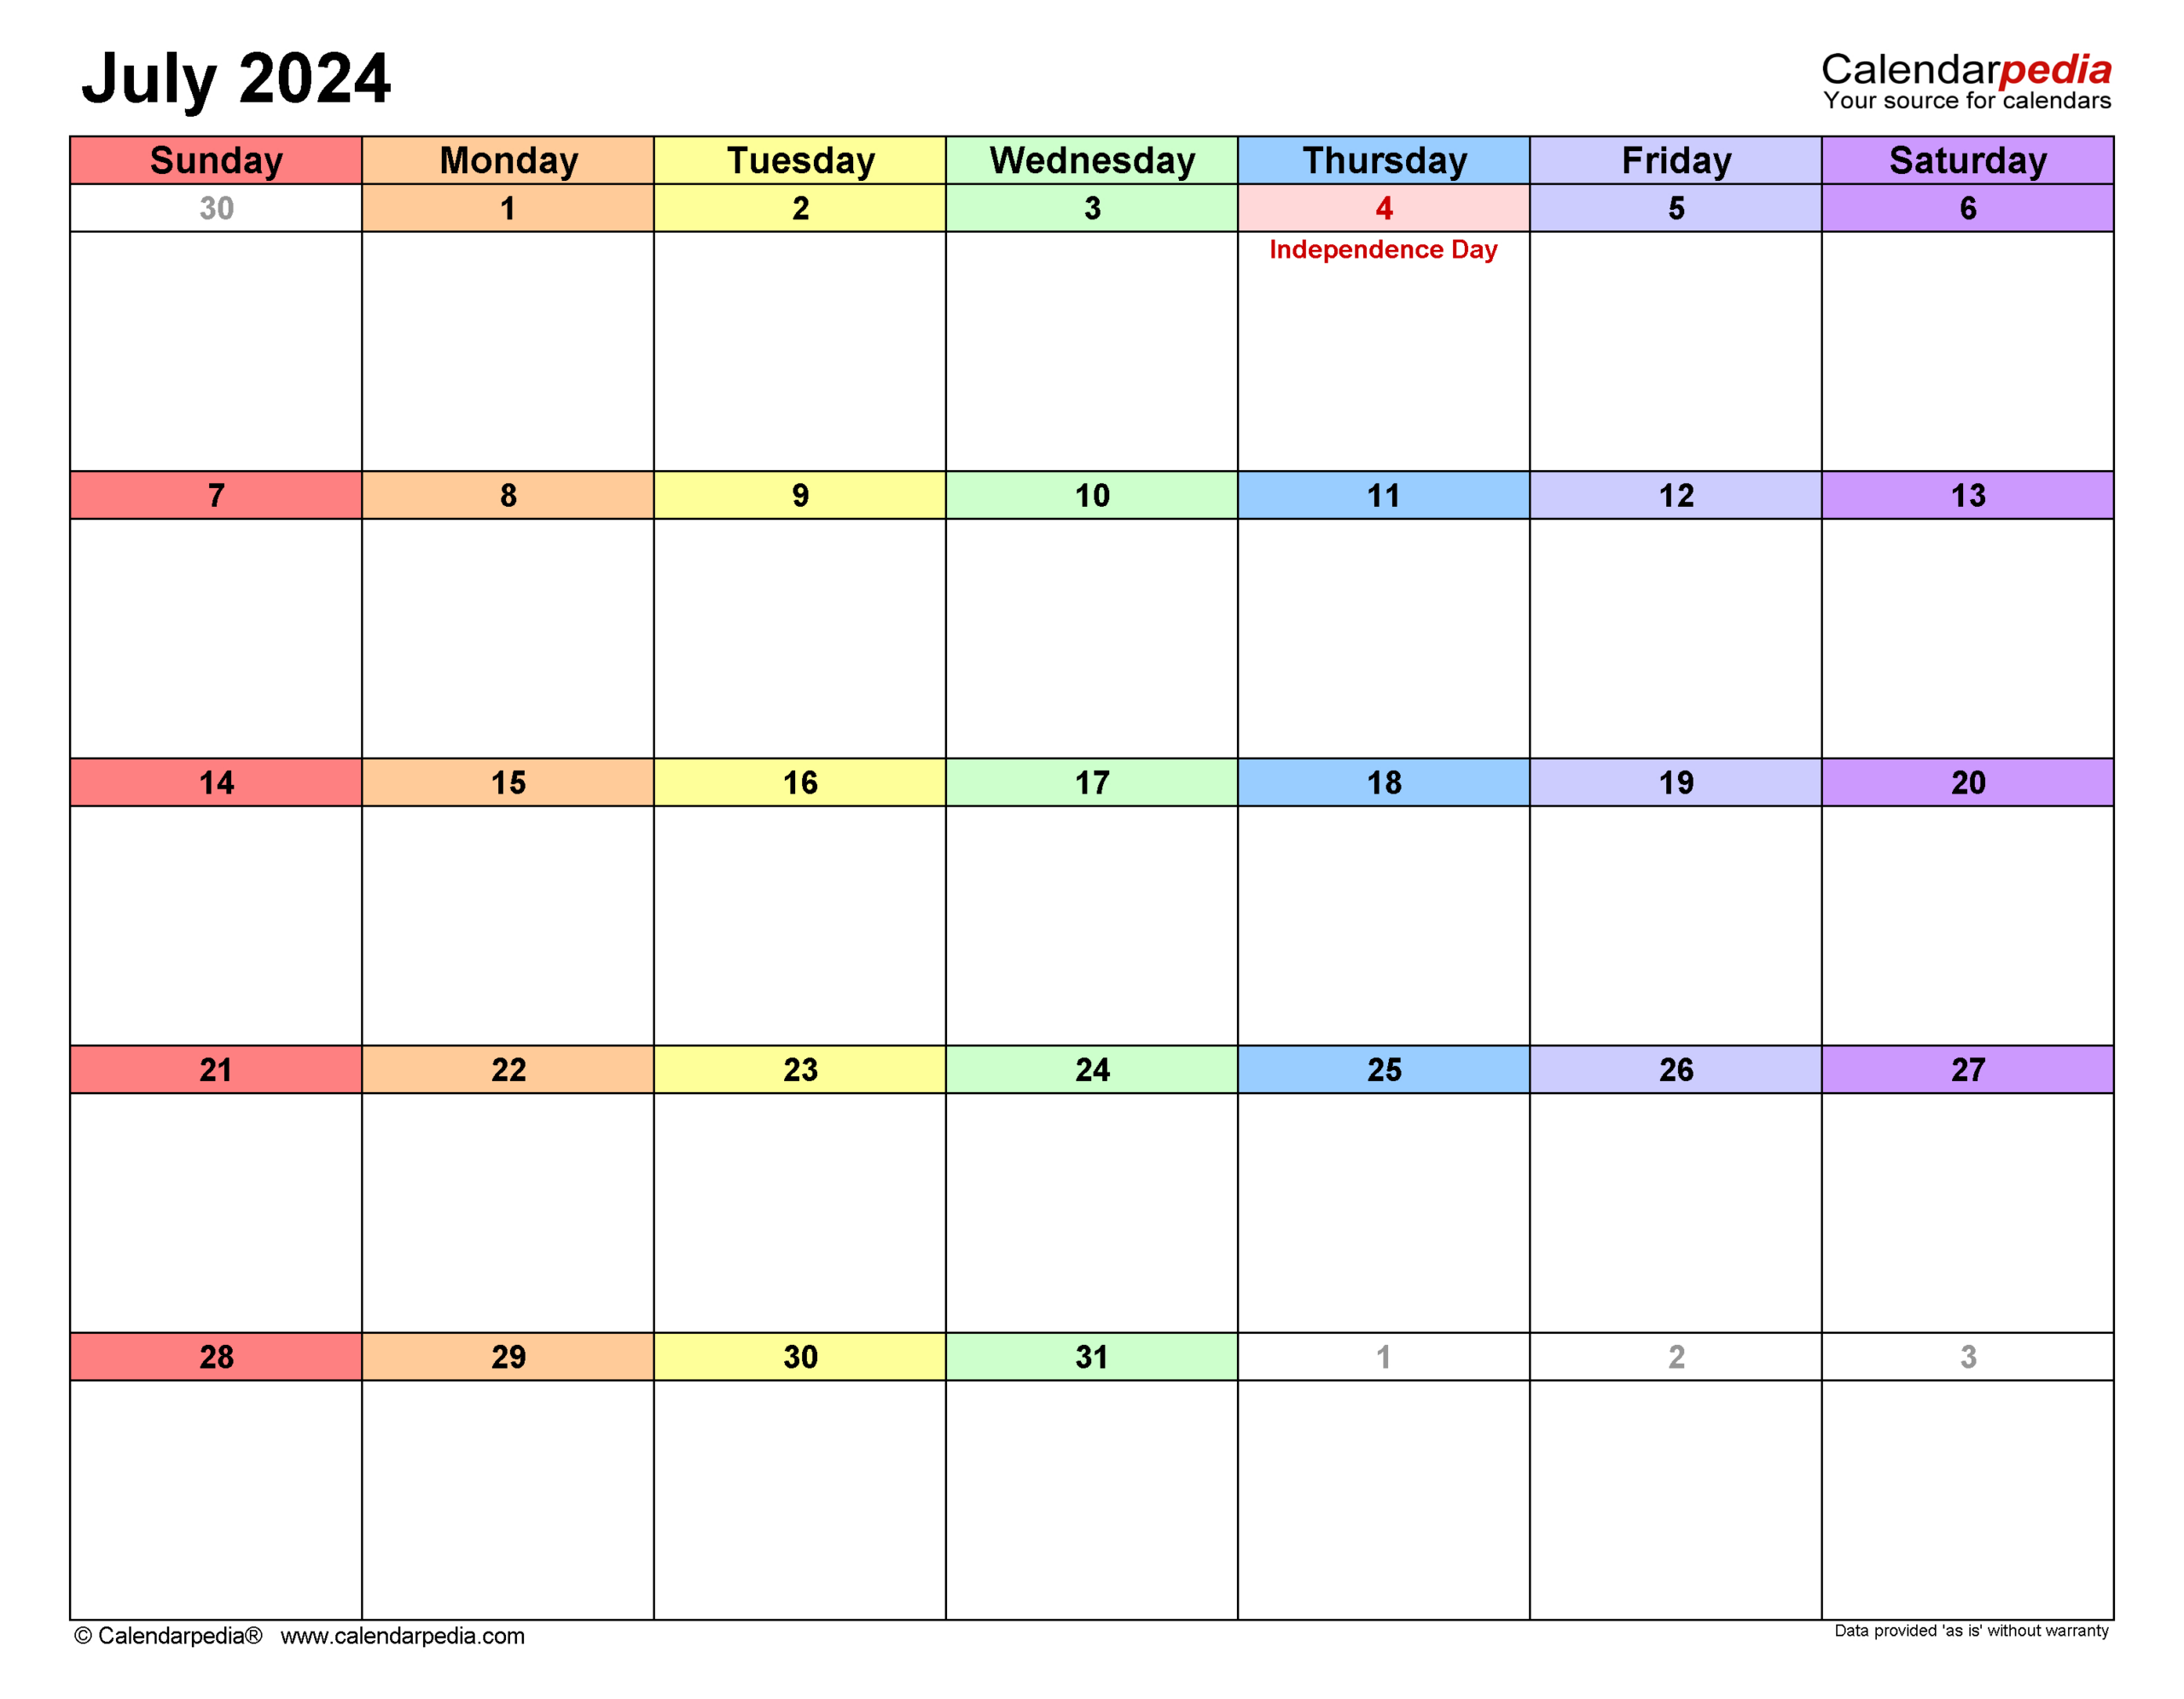 July 2024 Calendar | Templates For Word, Excel And Pdf in Fillable July 2024 Calendar